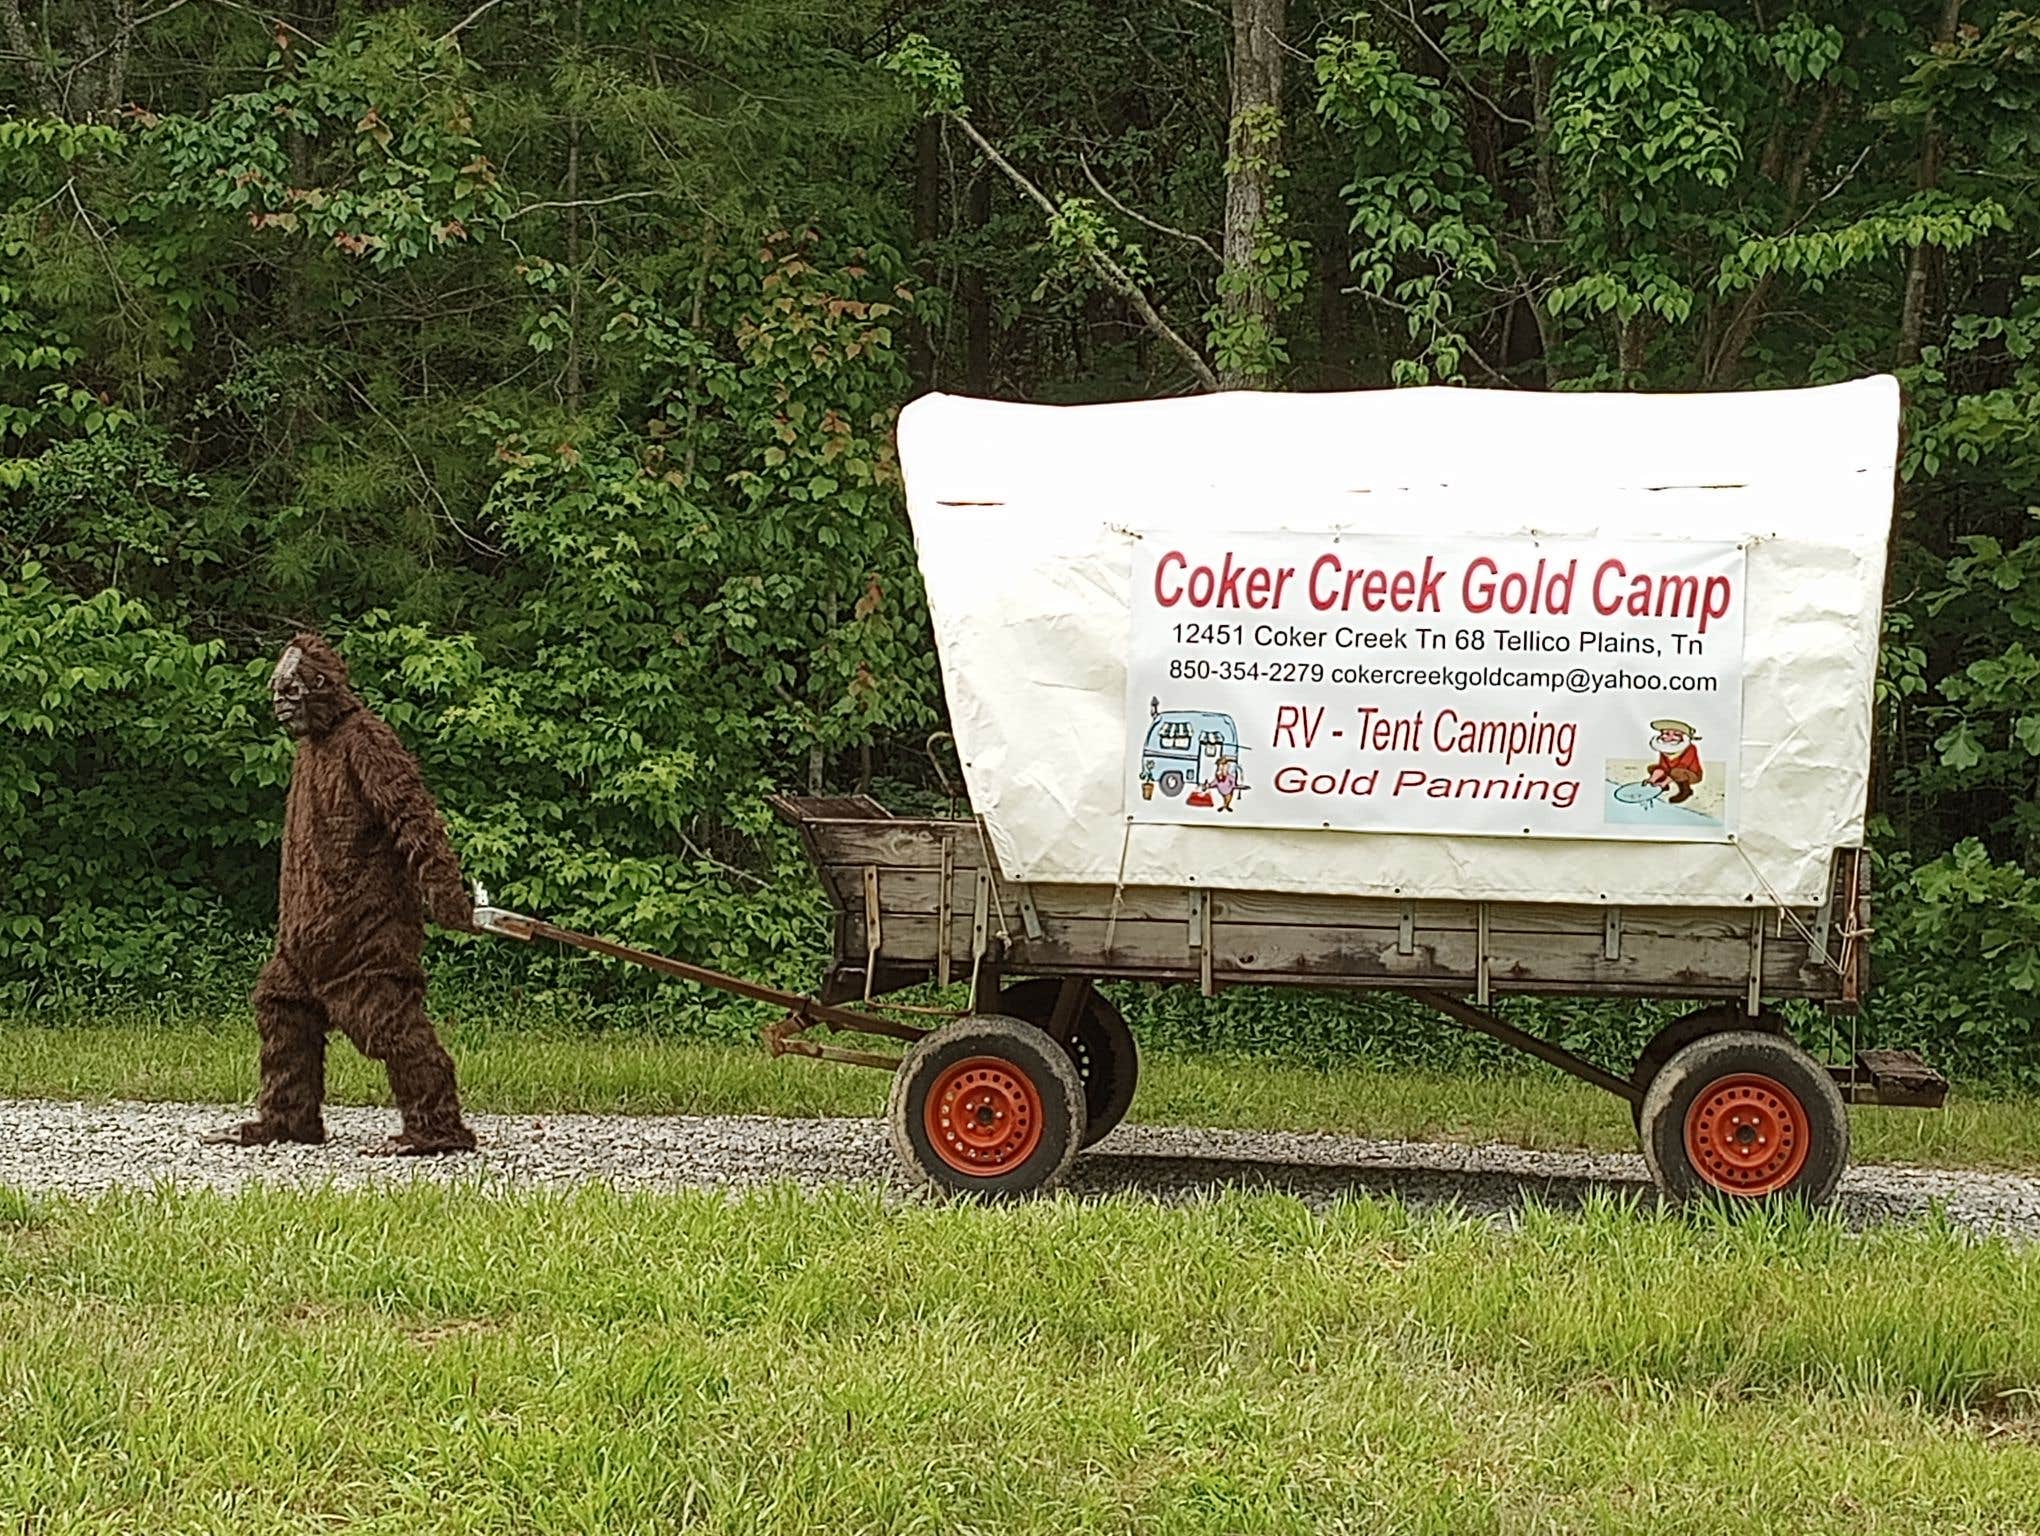 Camper submitted image from Coker Creek Gold Camp - 1